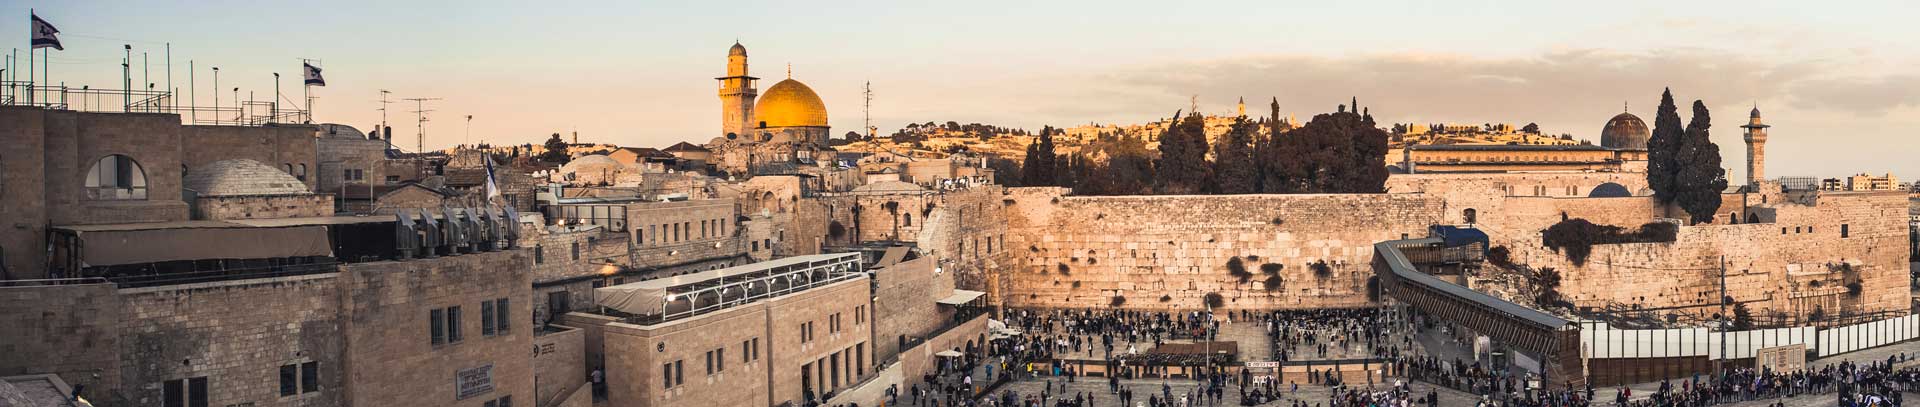 Christian Group Tours to Israel - Western Wall